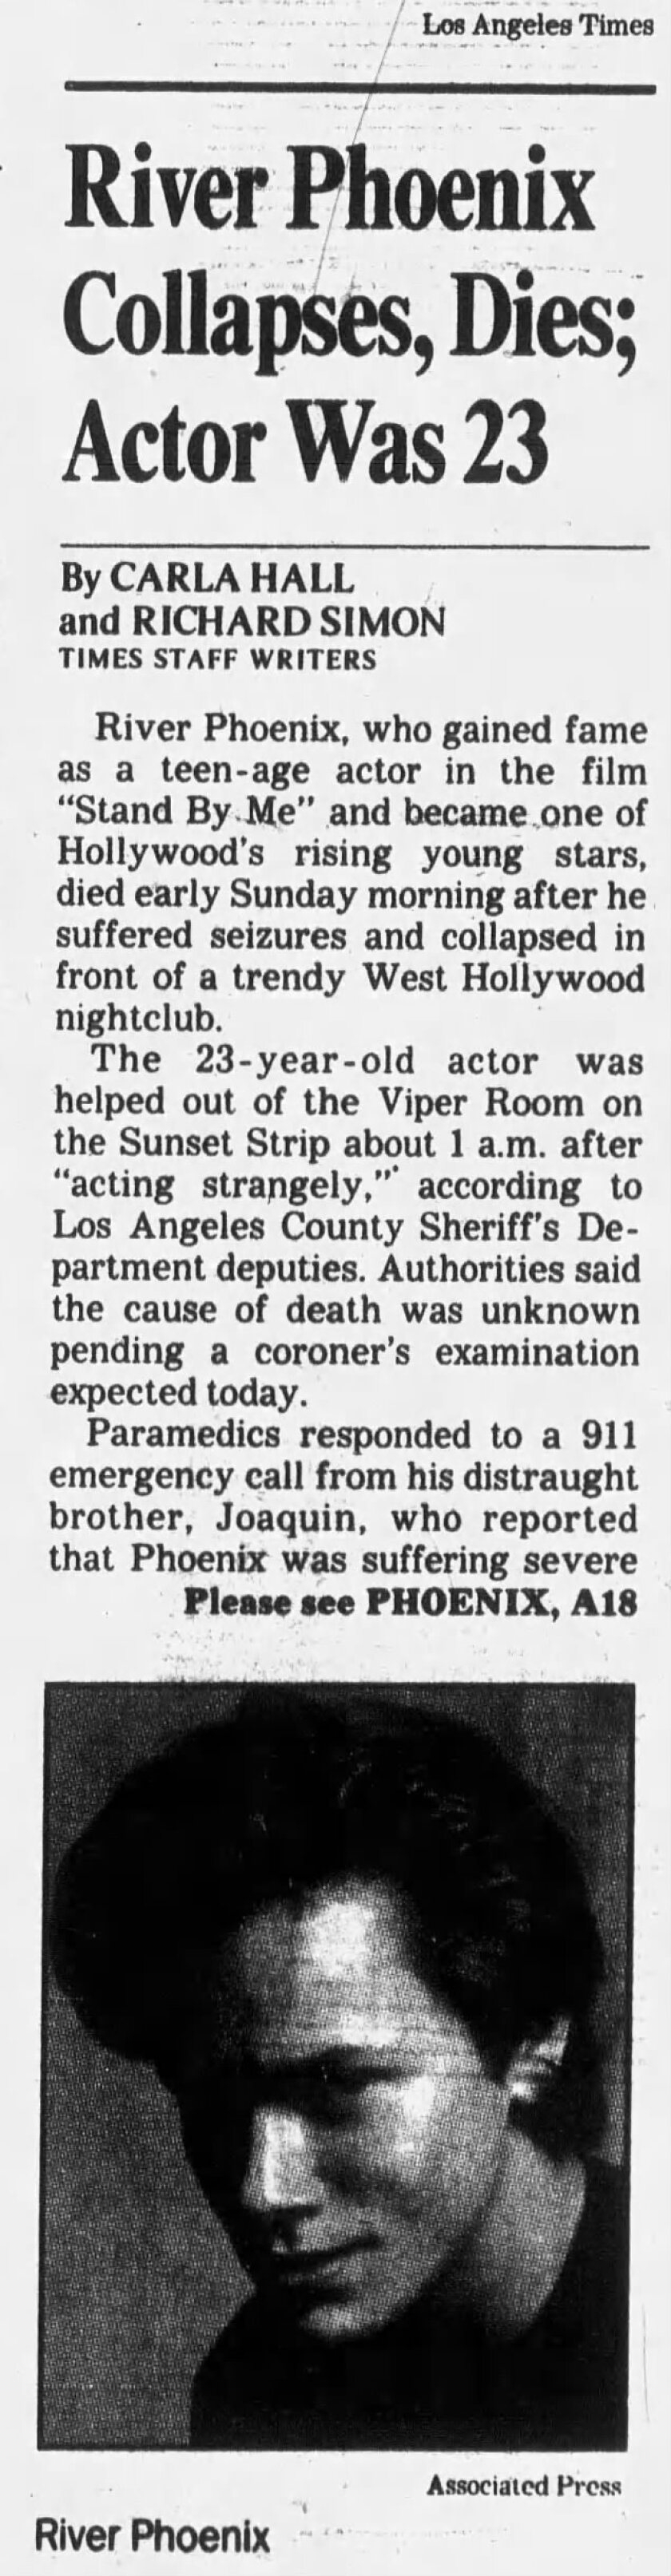 Clipped from the front page of the Los Angeles Times Nov. 1, 1993. (L.A. Times archive)